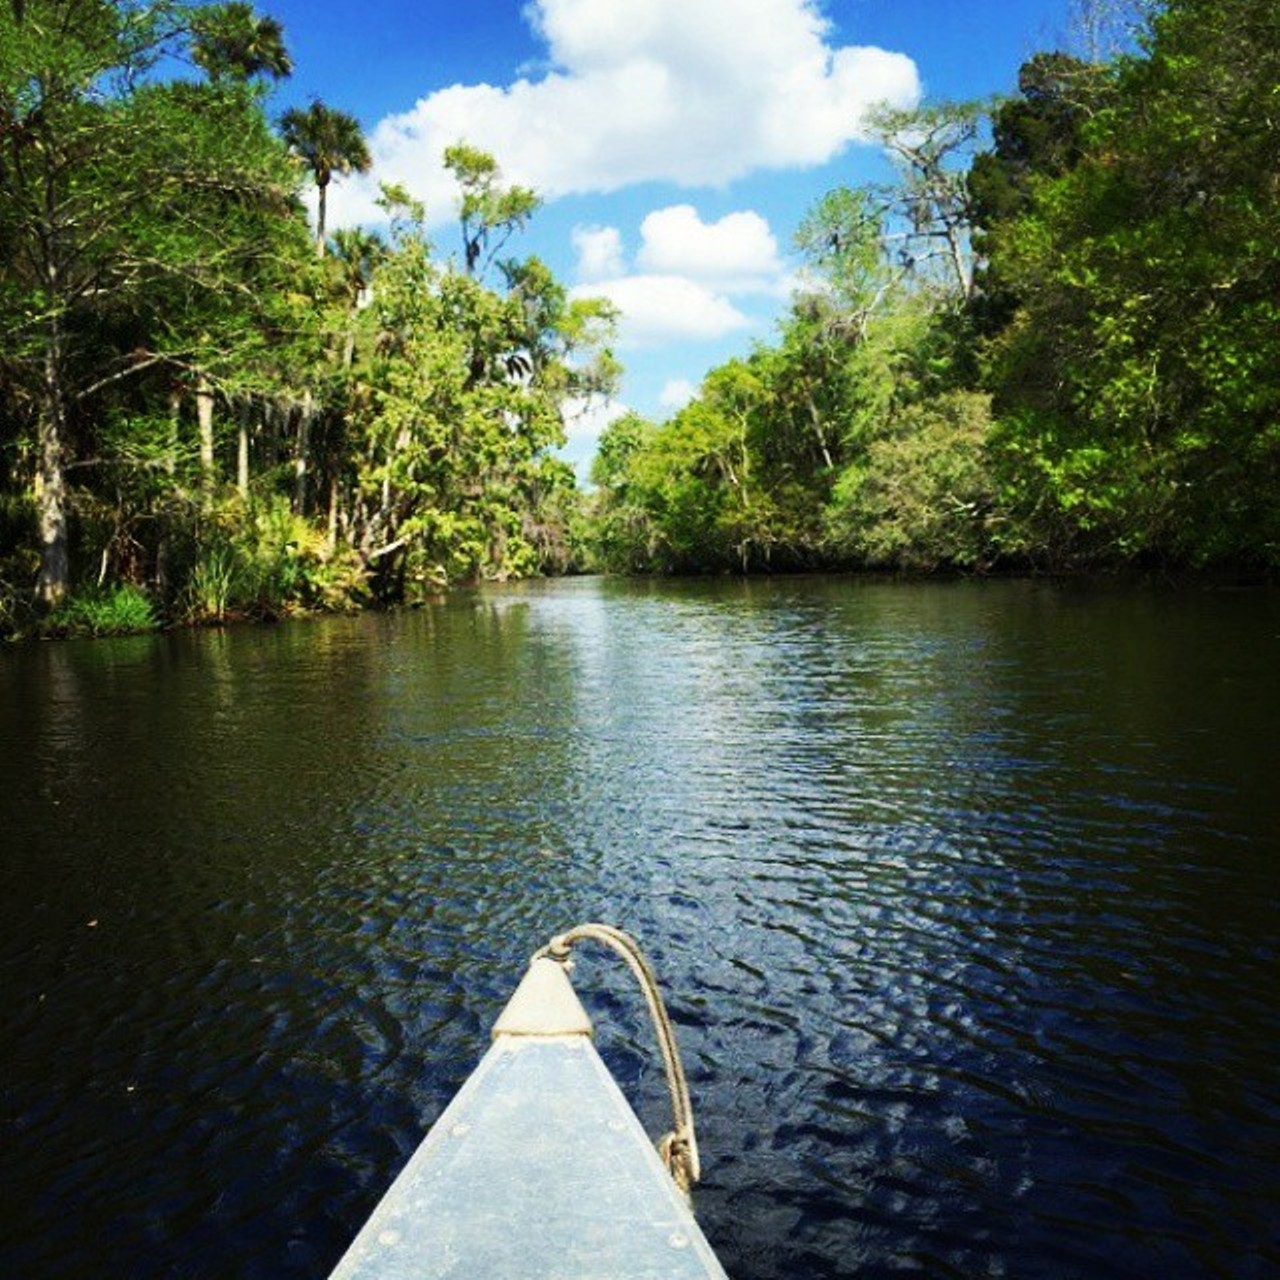  Making canoeing fun by adding beer at Cracker Creek
1795 Taylor Rd, Port Orange, (386) 304-0778
You can rent a canoe or kayak, and paddle through this 20-acre sanctuary. You&#146;ll see forests, swamps, freshwater bogs, cypress marshes, and all sorts of flora and fauna, all with a drink or two to keep you relaxed. Kayak rentals go from $18 an hour and up, and canoes will cost you $24 an hour and up.
Photo via sandordujour/Instagram